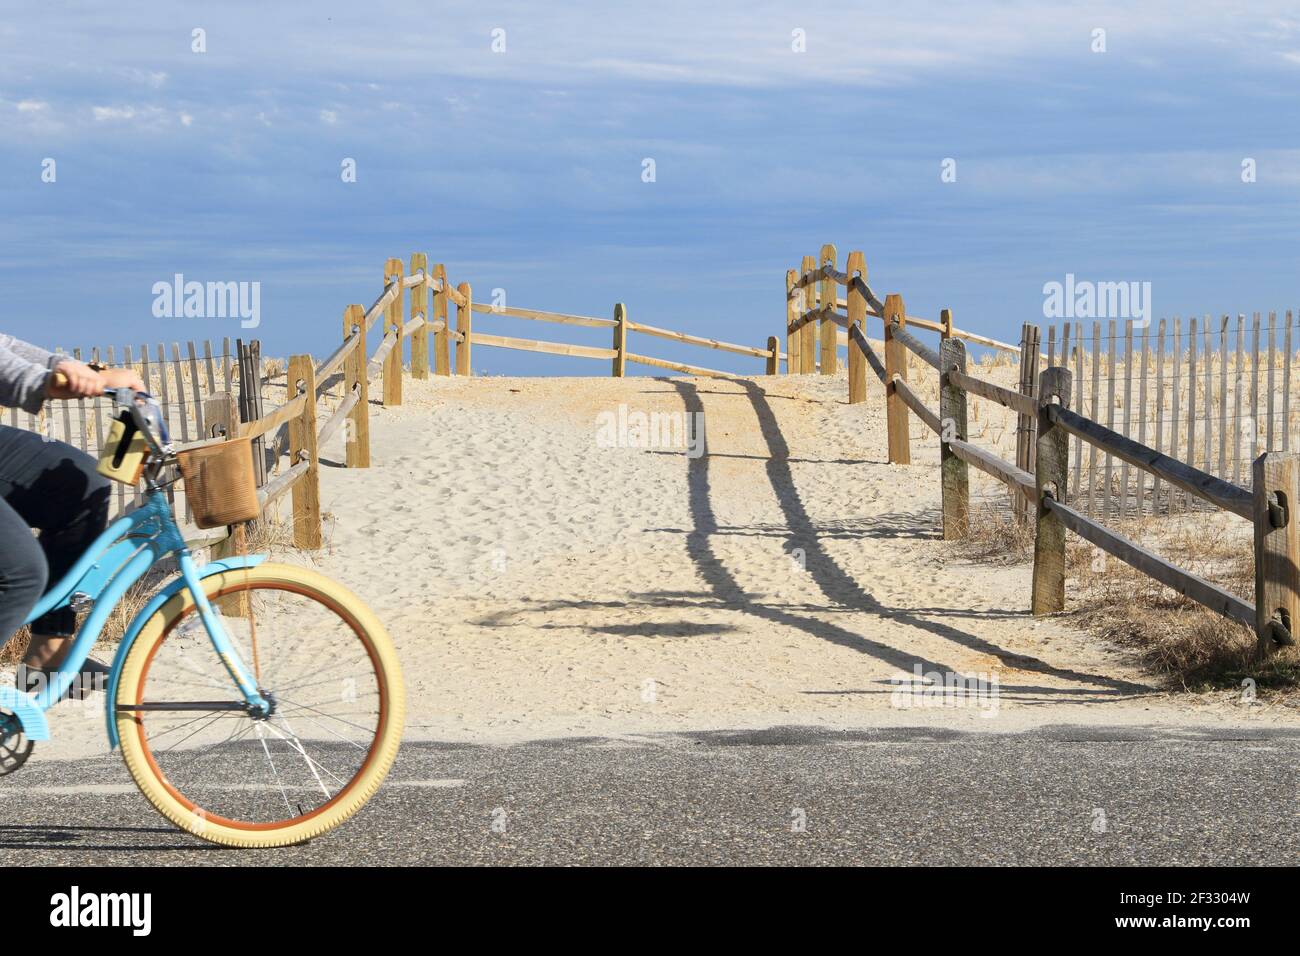 Smile, You're in Sea Isle is the catch phrase of Sea Isle City, a shore town in New Jersey USA . A bicyclist passes a beach access ramp. Stock Photo